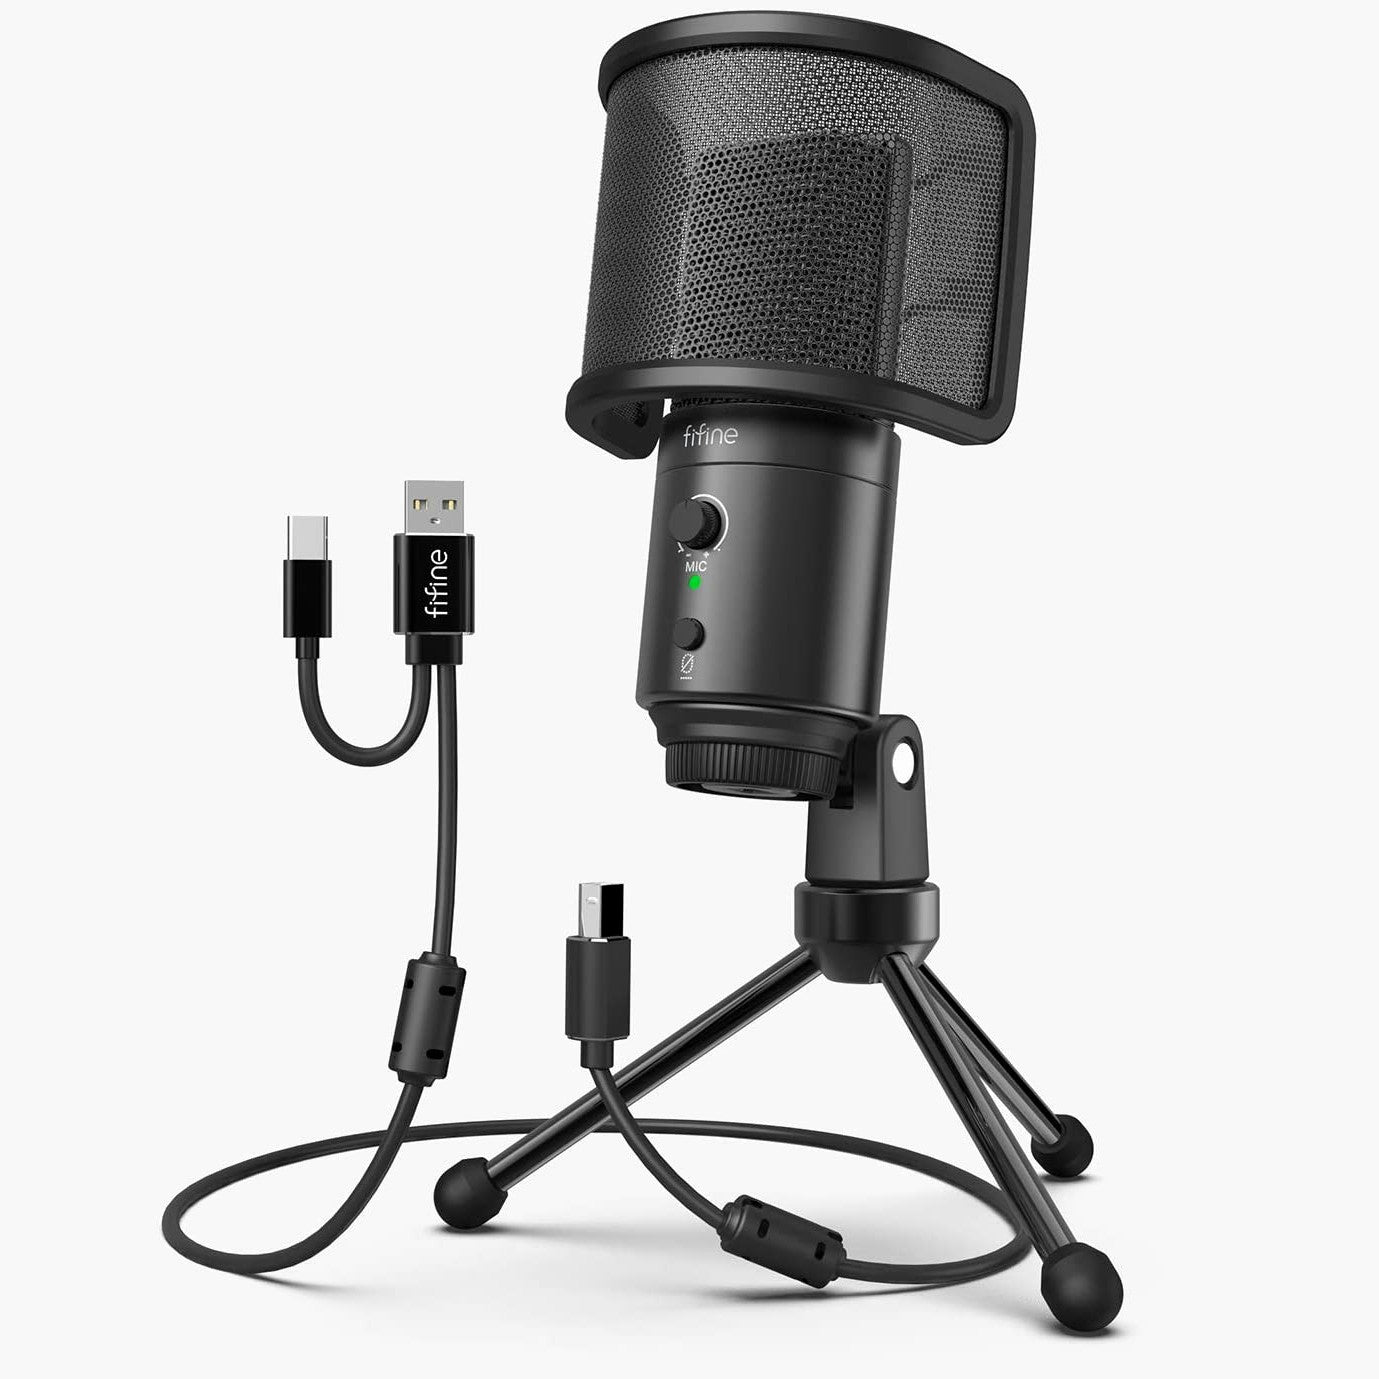 FIFINE K669 USB Microphone with Volume Dial for Streaming, Vocal Recor